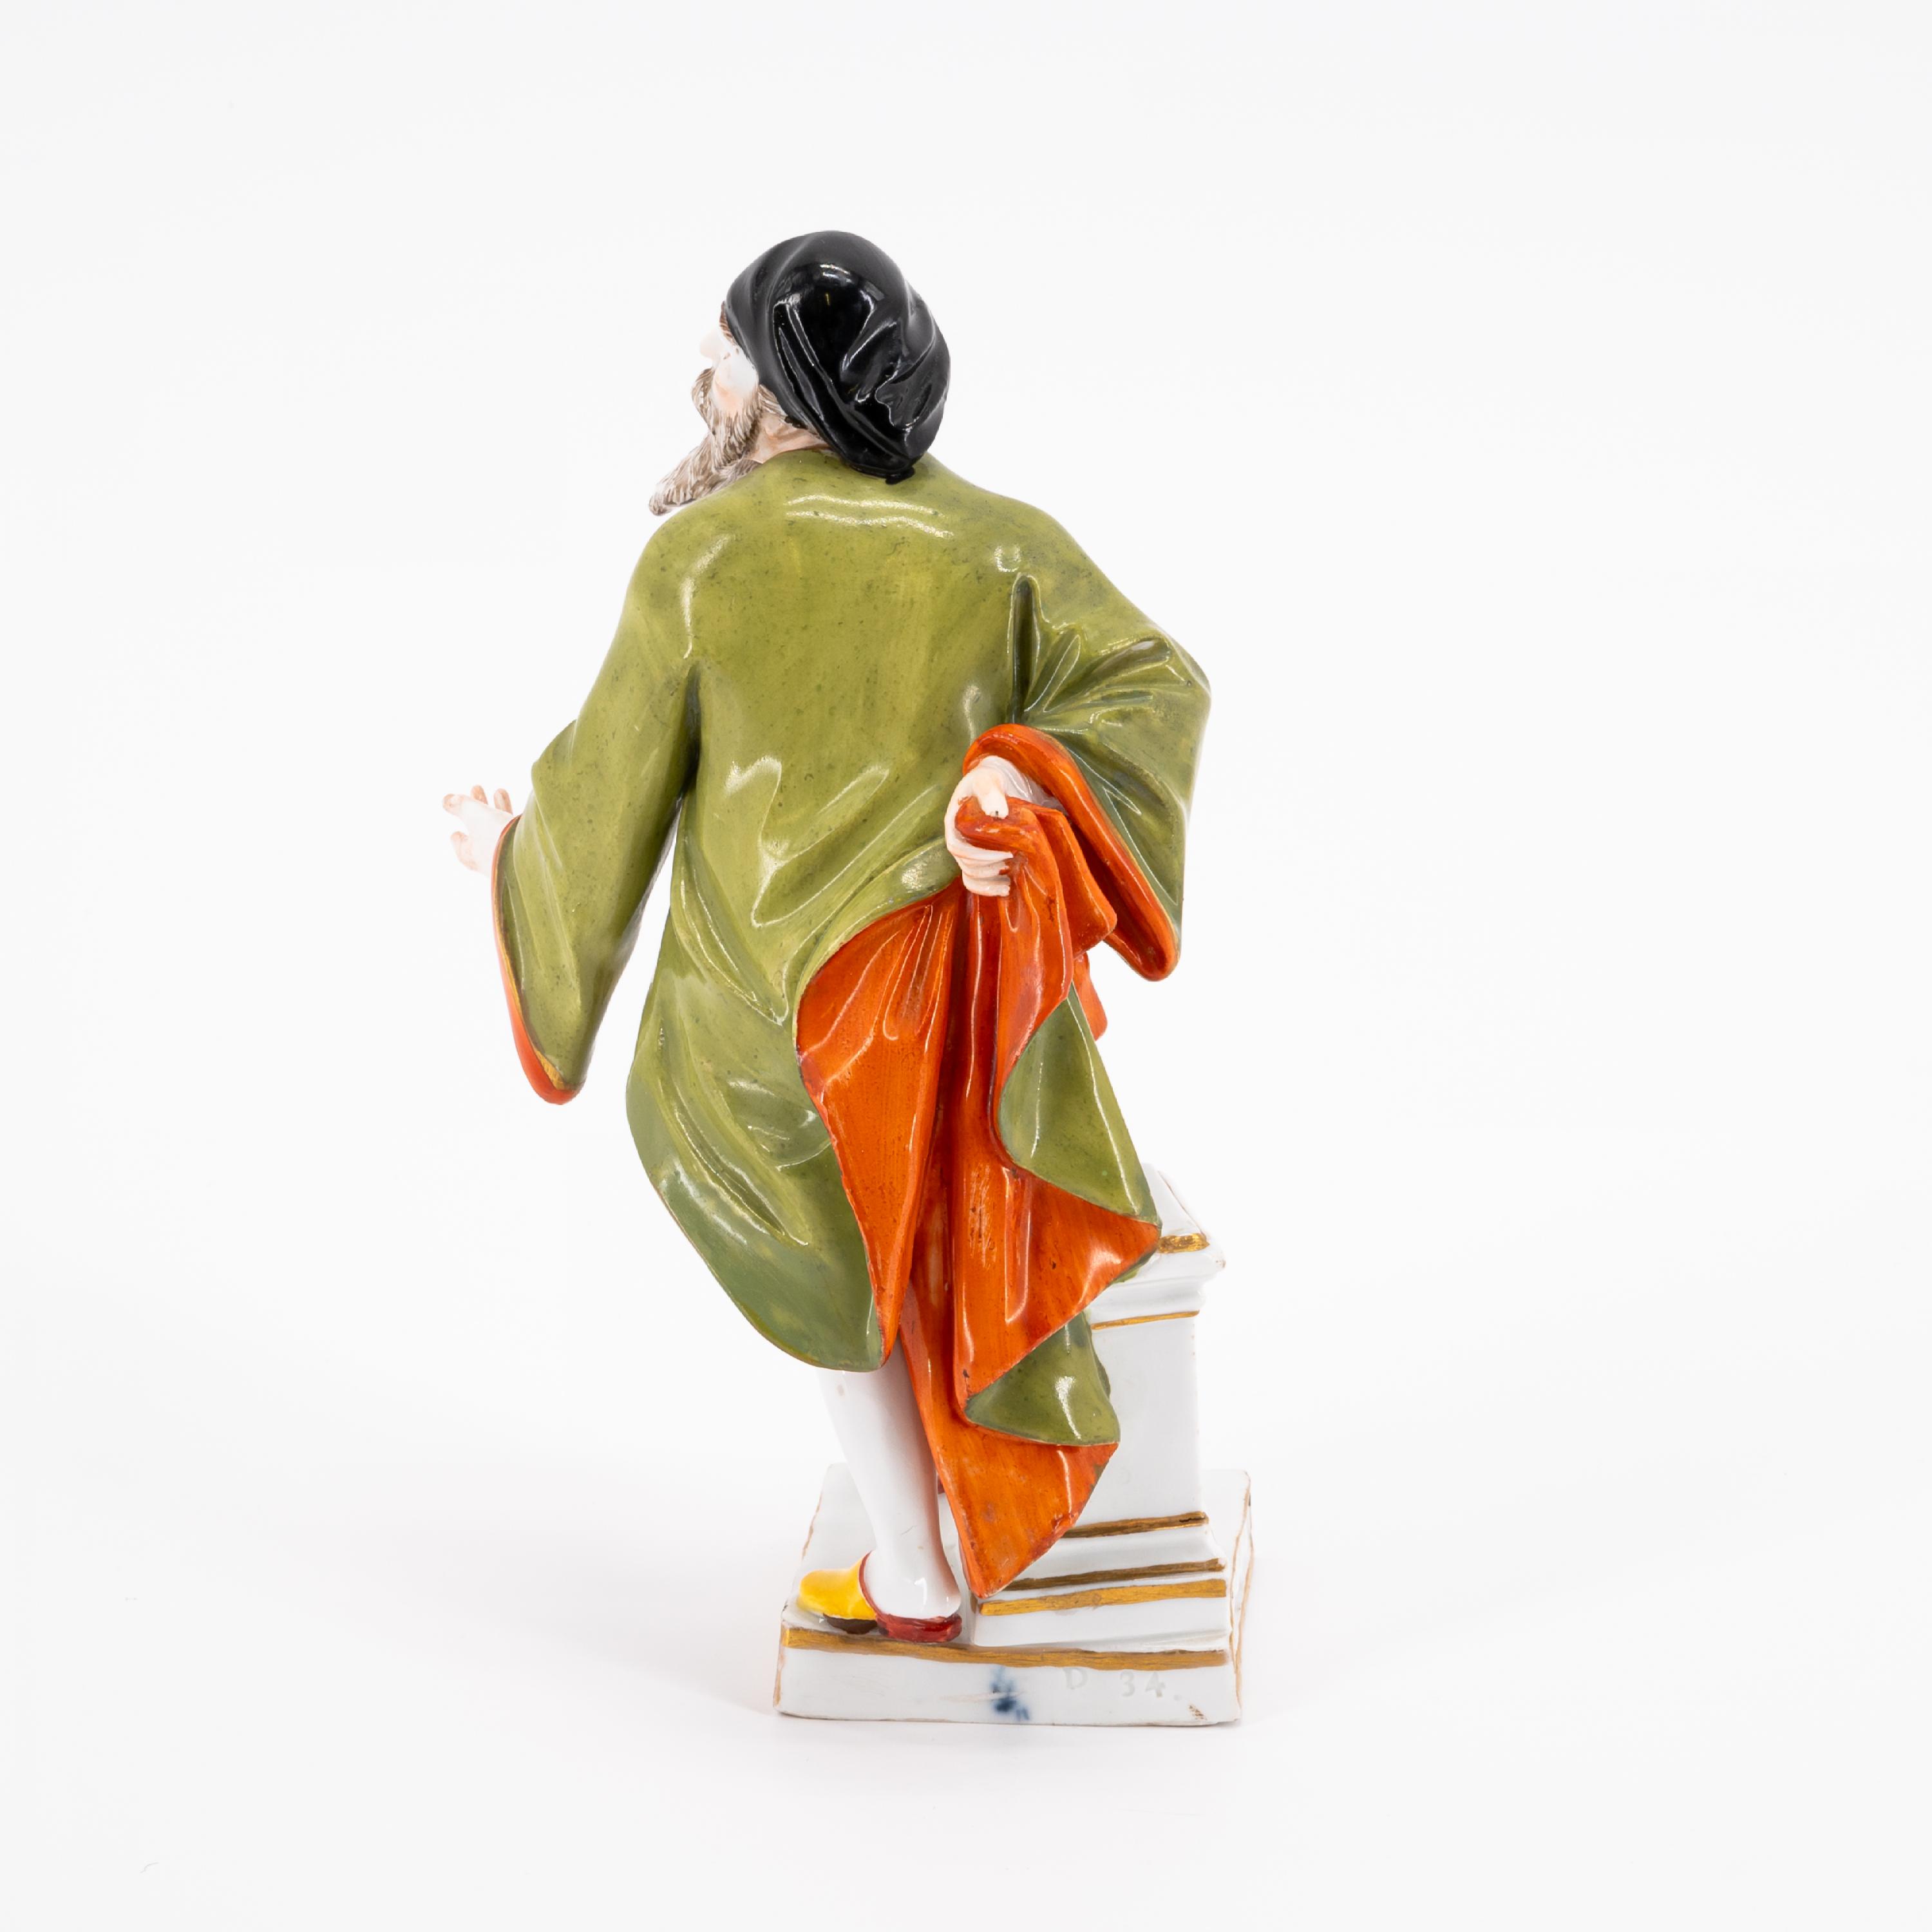 PORCELAIN PANTALONE FROM THE COMMEDIA DELL'ARTE - Image 3 of 5